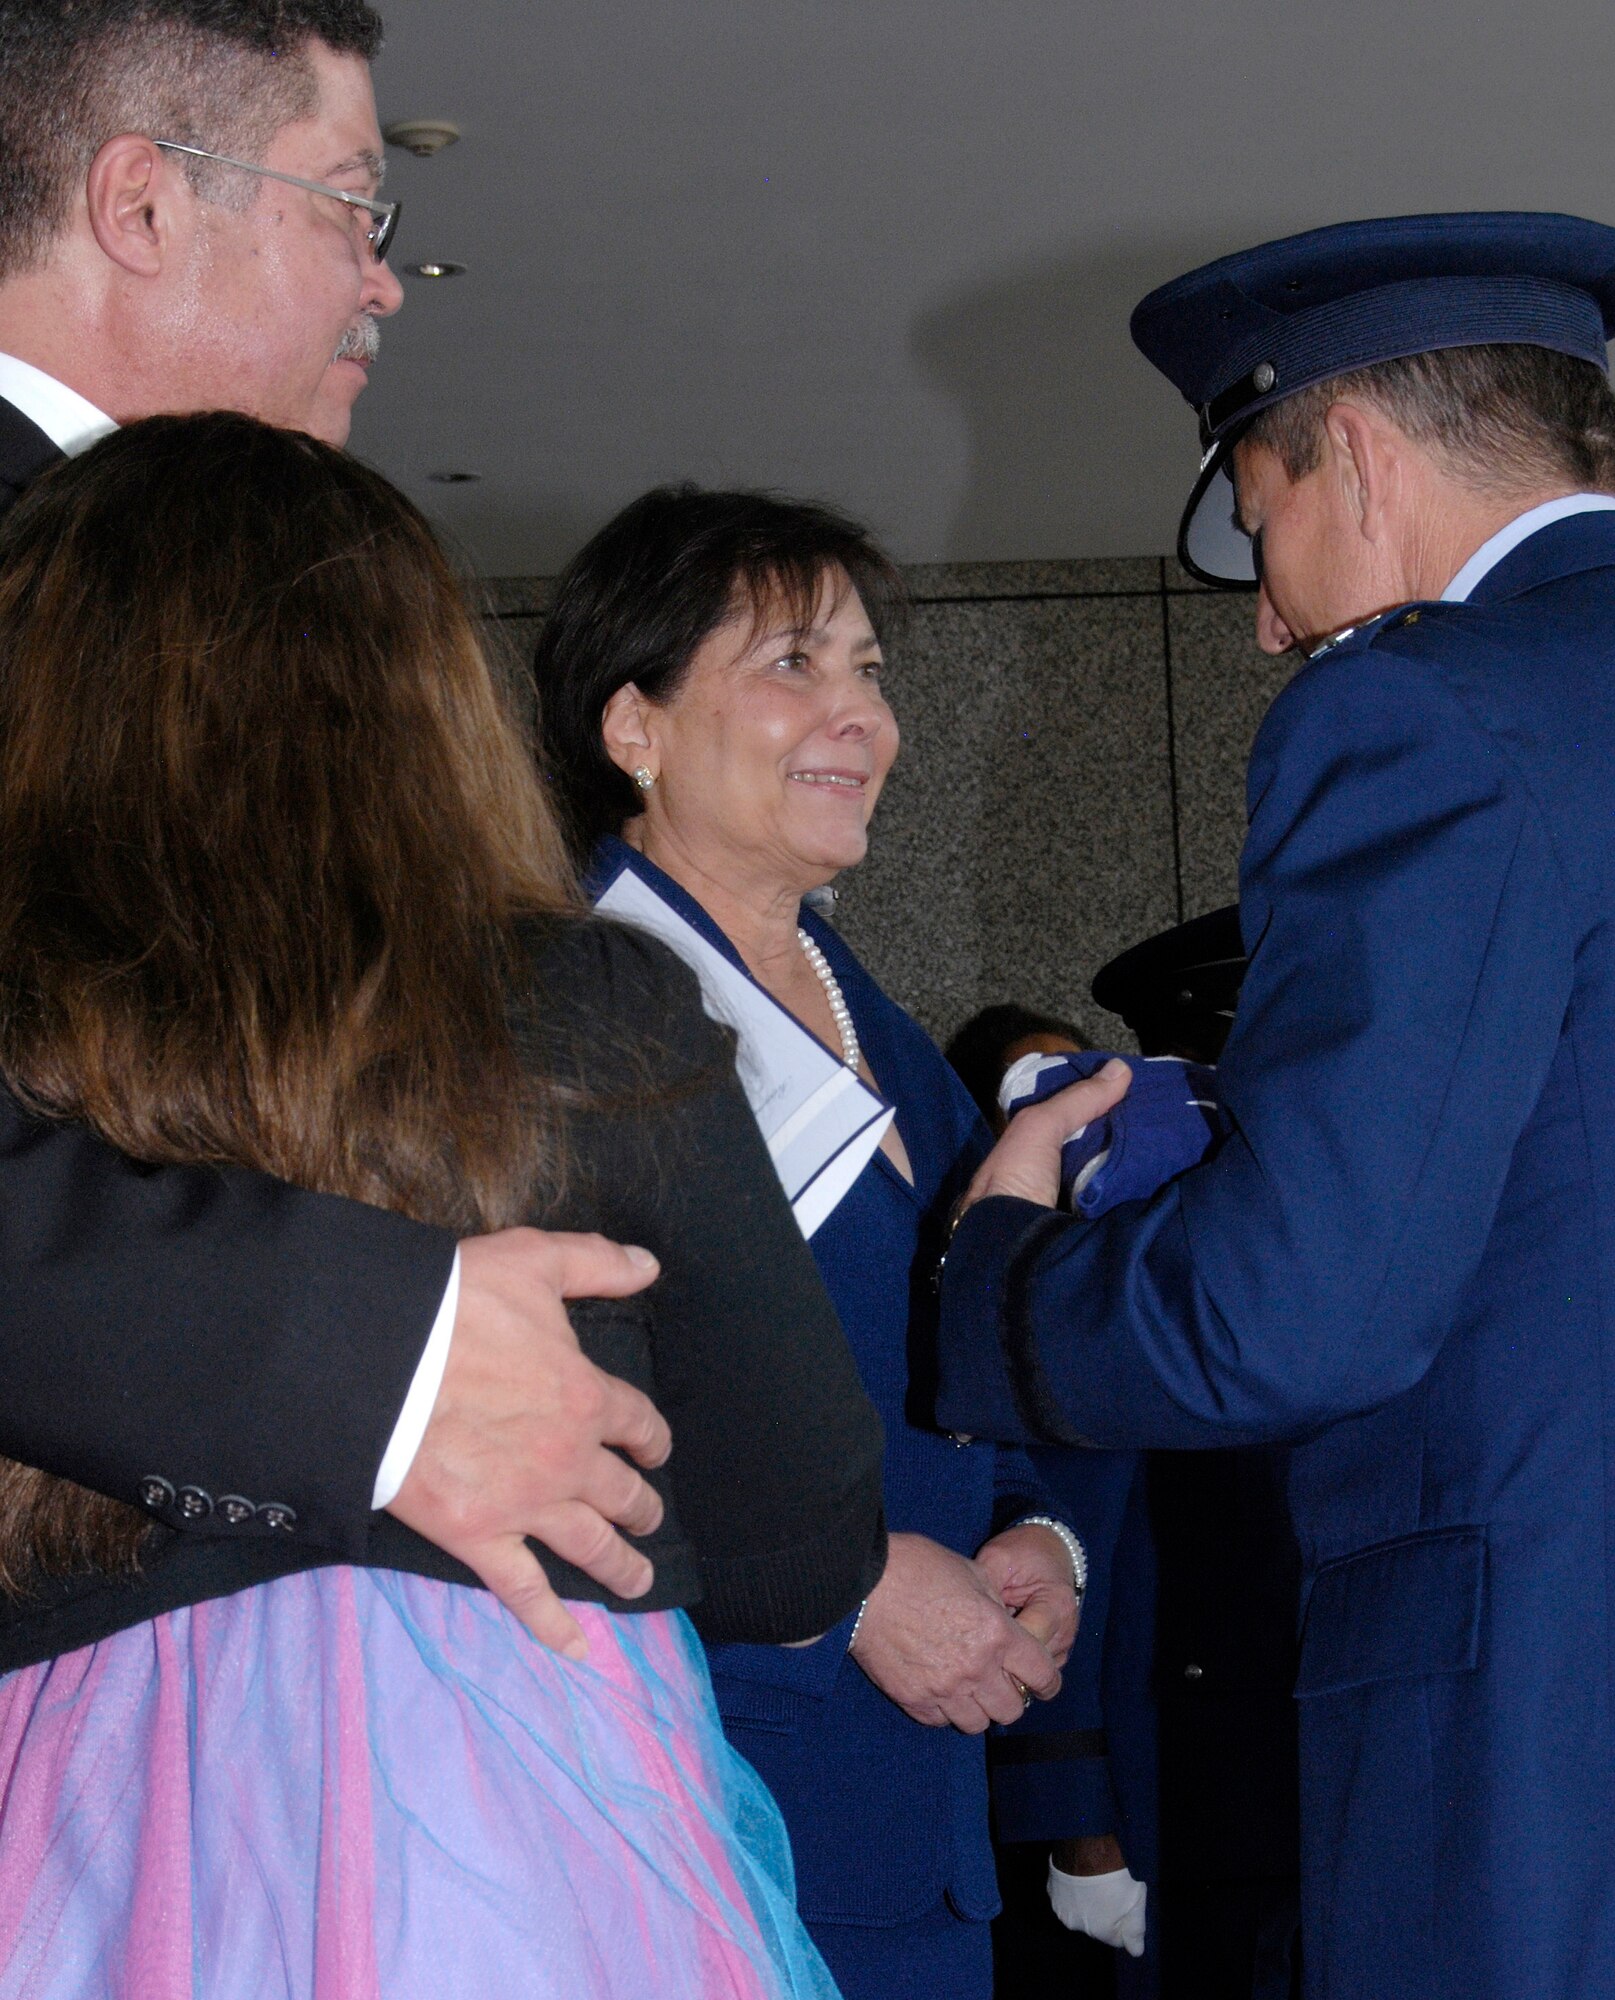 Tina Bush (center) receives a flag from Air Force Academy Superintendent Lt. Gen. Mike Gould during a memorial service March 16, 2013, for Chuck Bush, the first African American to graduate from the Academy. The couple was married for 48 years. Chuck Bush, who graduated from the Academy in 1963, died Nov. 5, 2012, at his home in Lolo, Mont. Also pictured are Michael Wills (left) and Grace Wills (lower left). (U.S. Air Force photo/Don Branum)